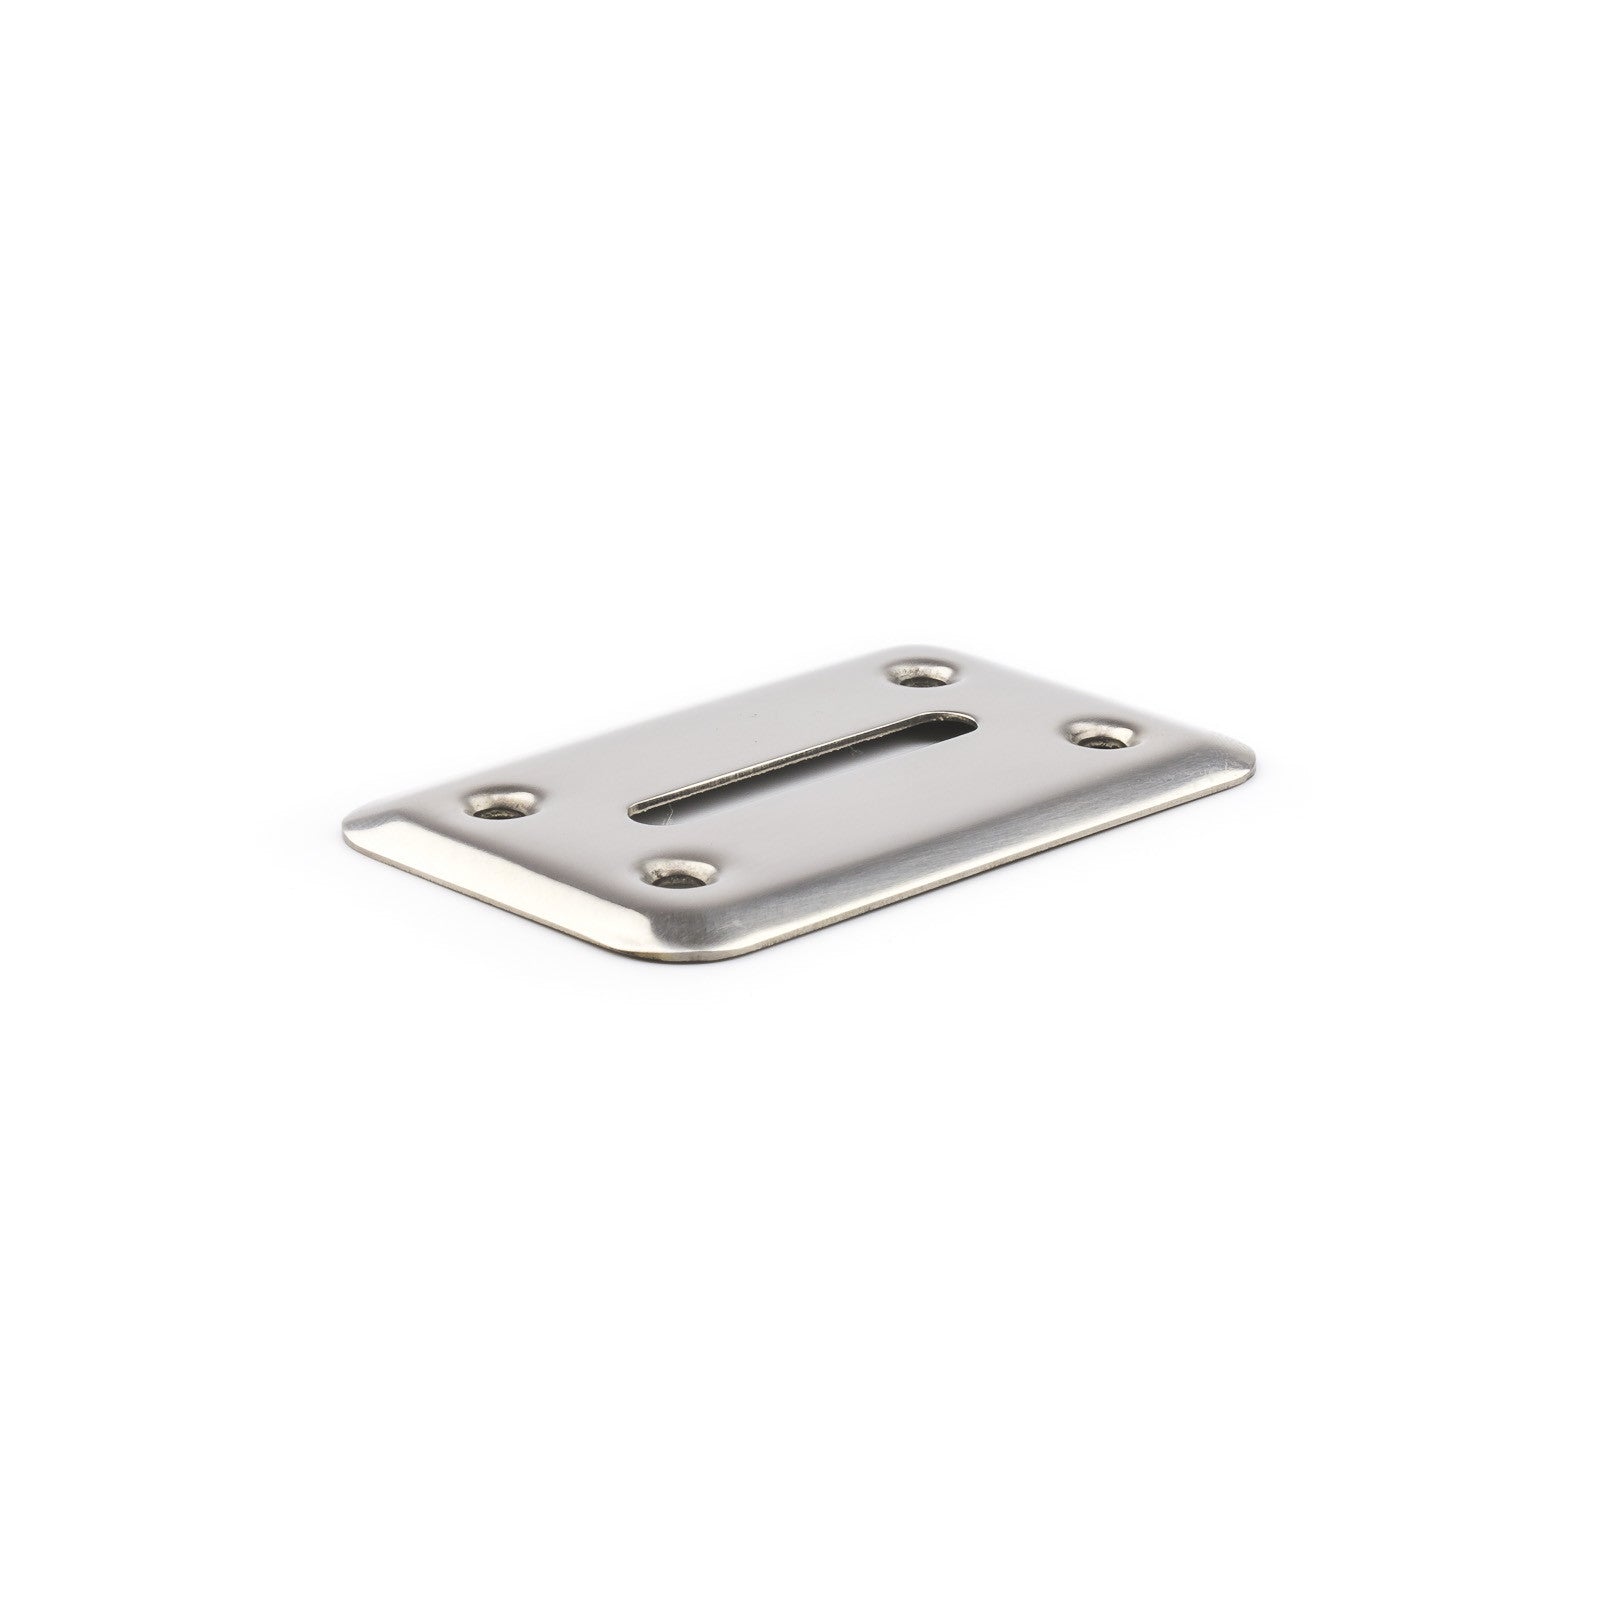 Money Chip Drop Slot Frame - Stainless Steel